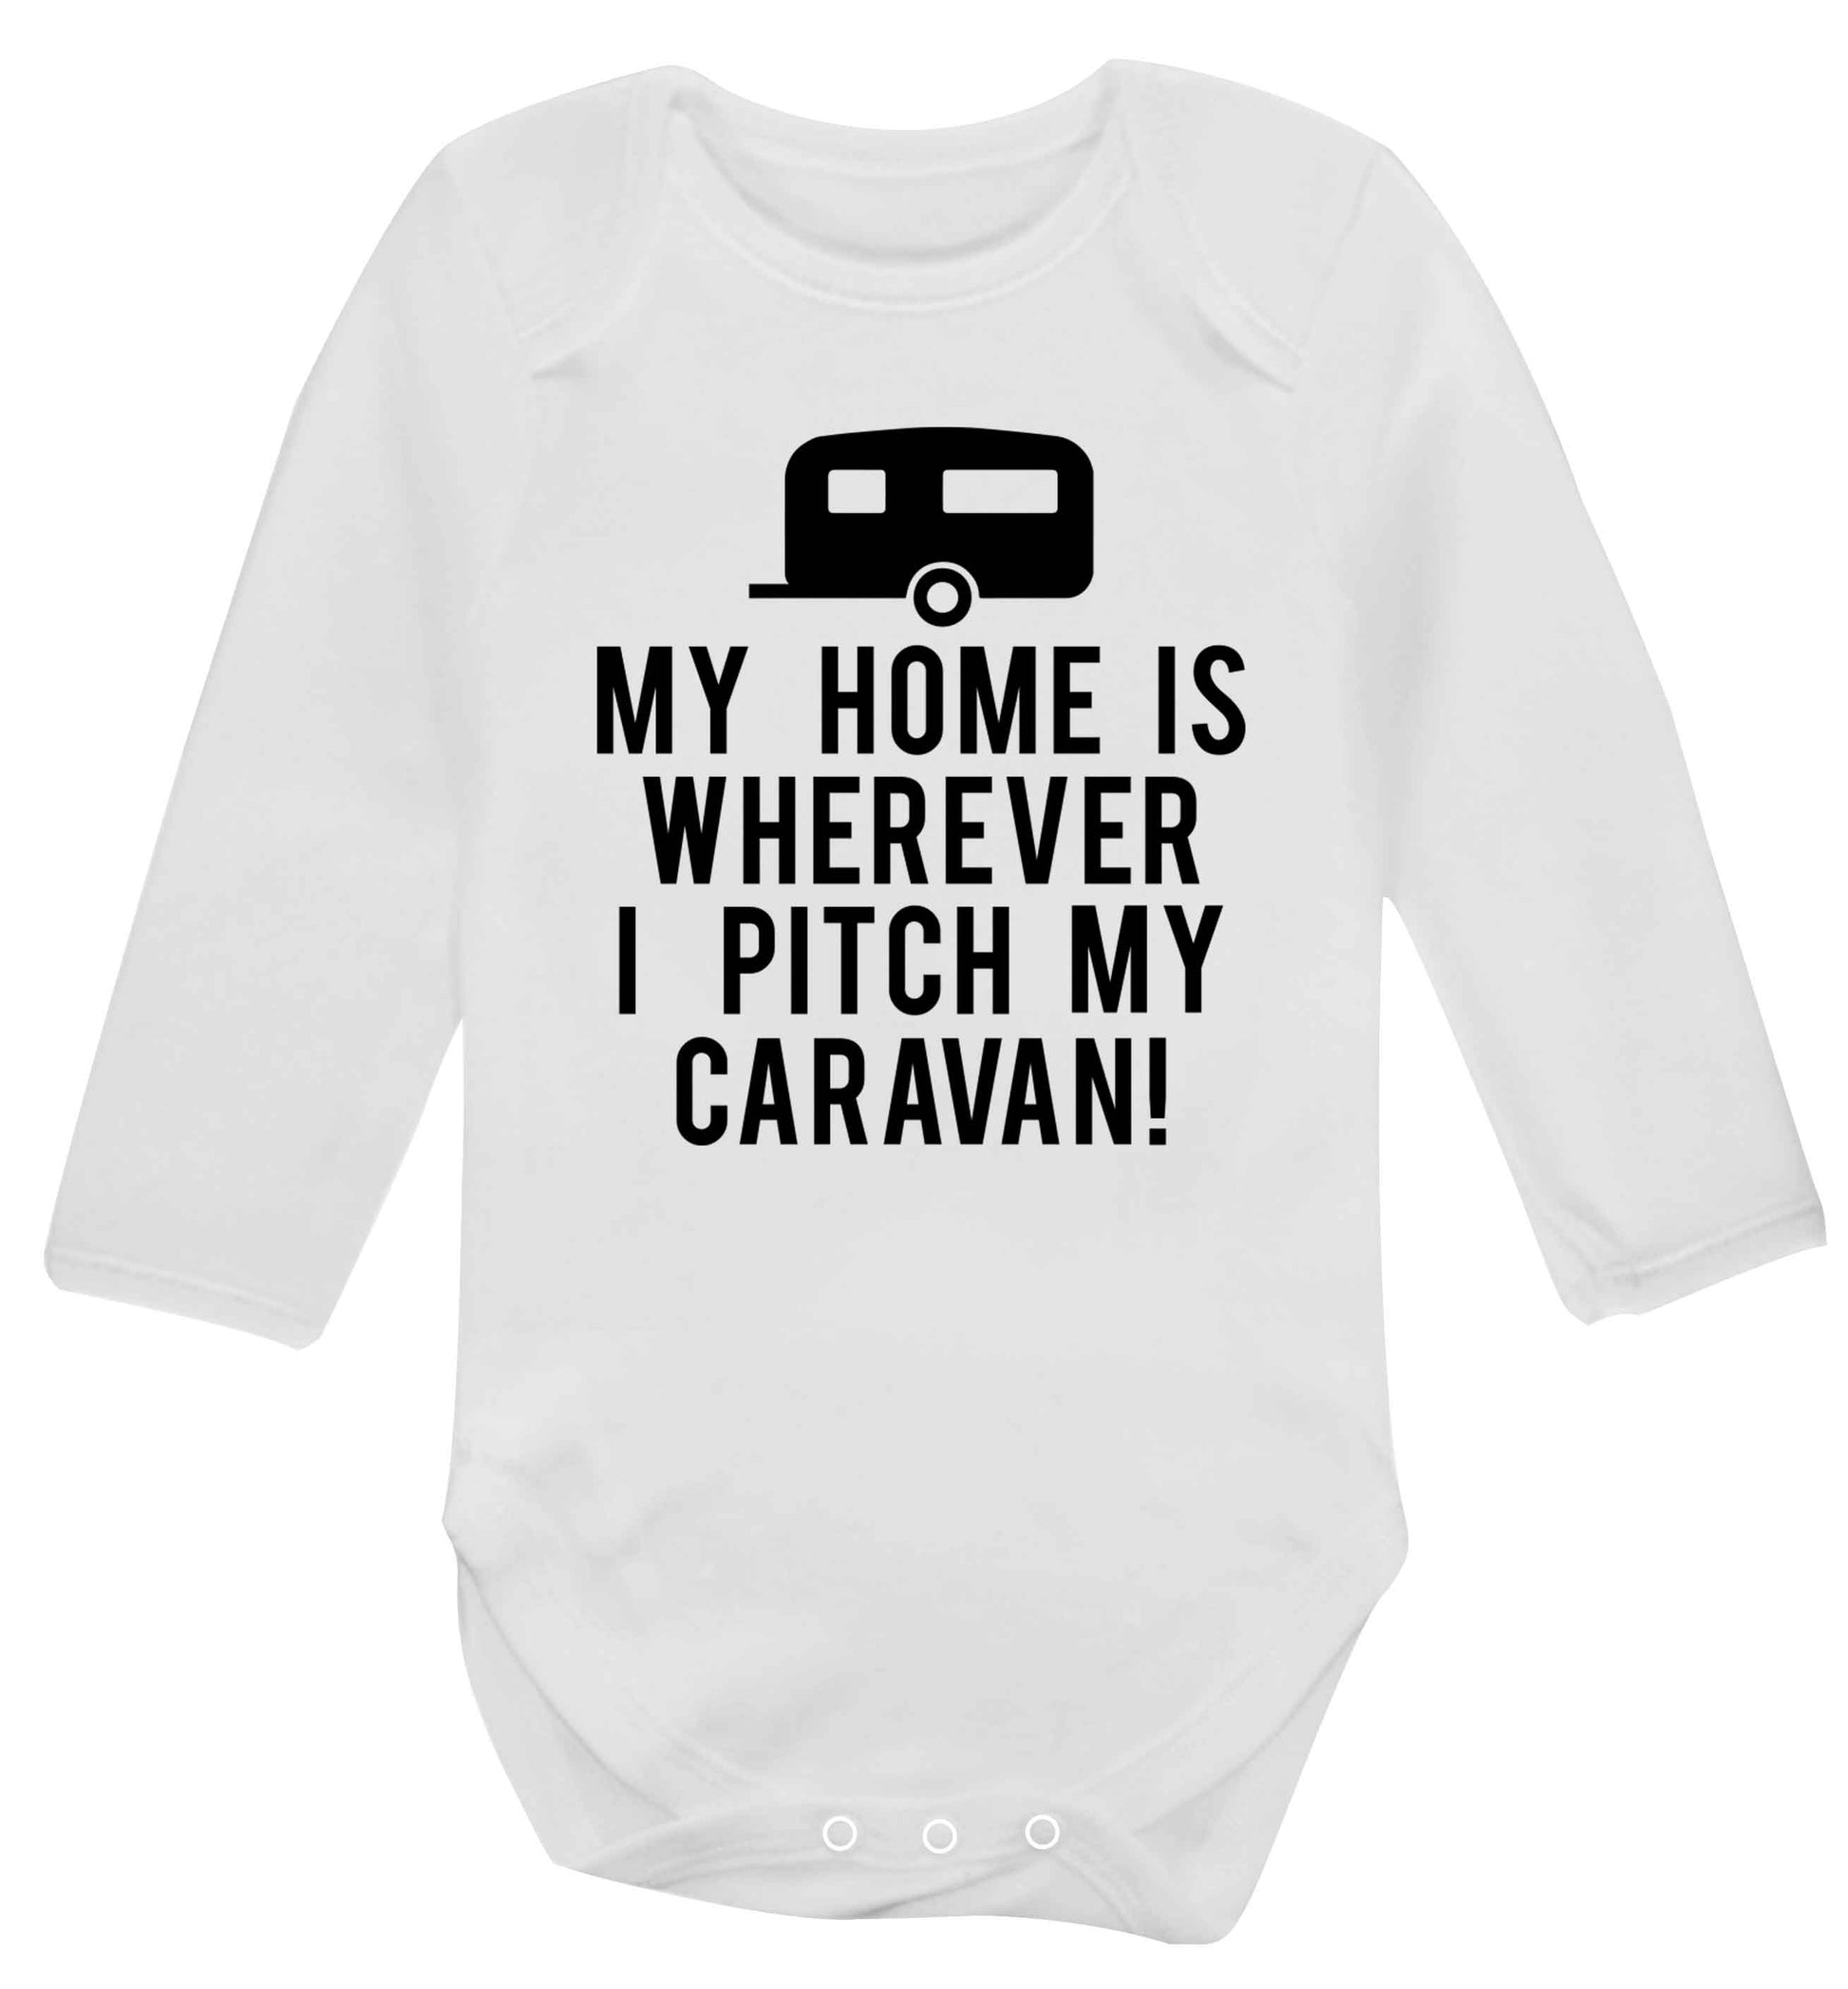 My home is wherever I pitch my caravan Baby Vest long sleeved white 6-12 months